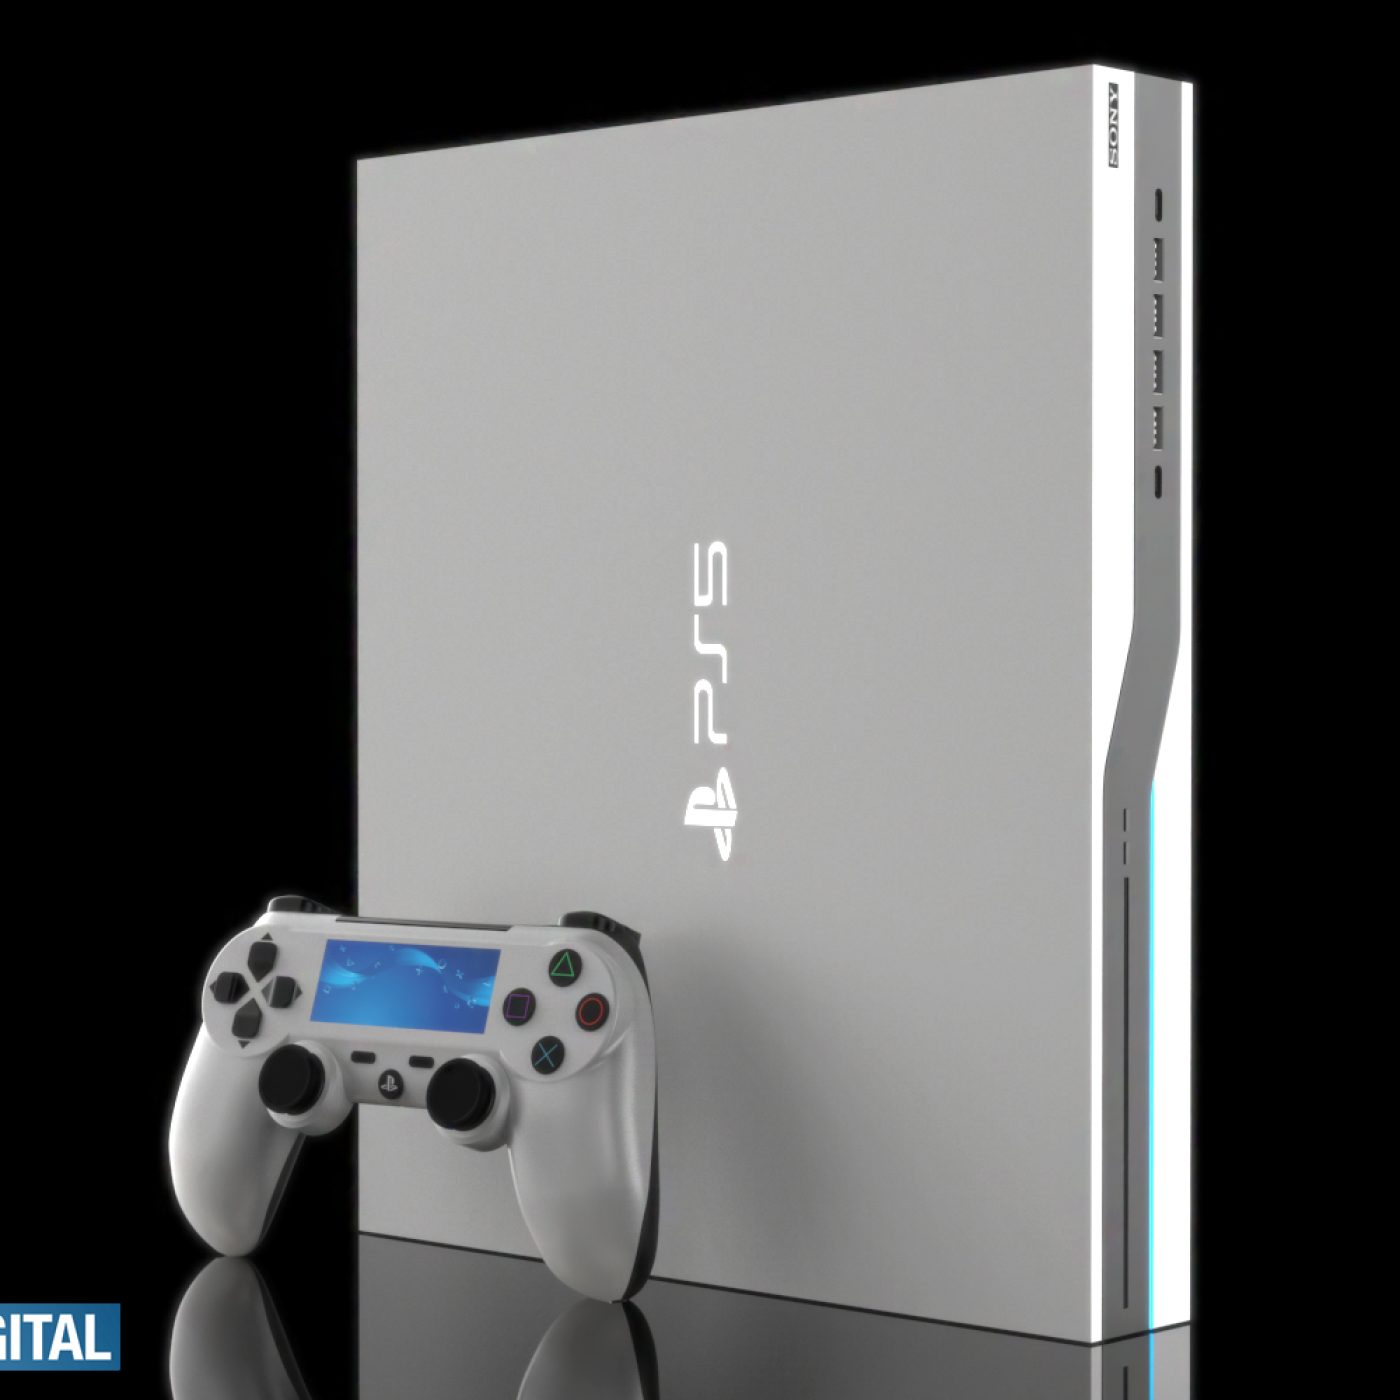 leaker just revealed Sony's exact PS5 design reveal date